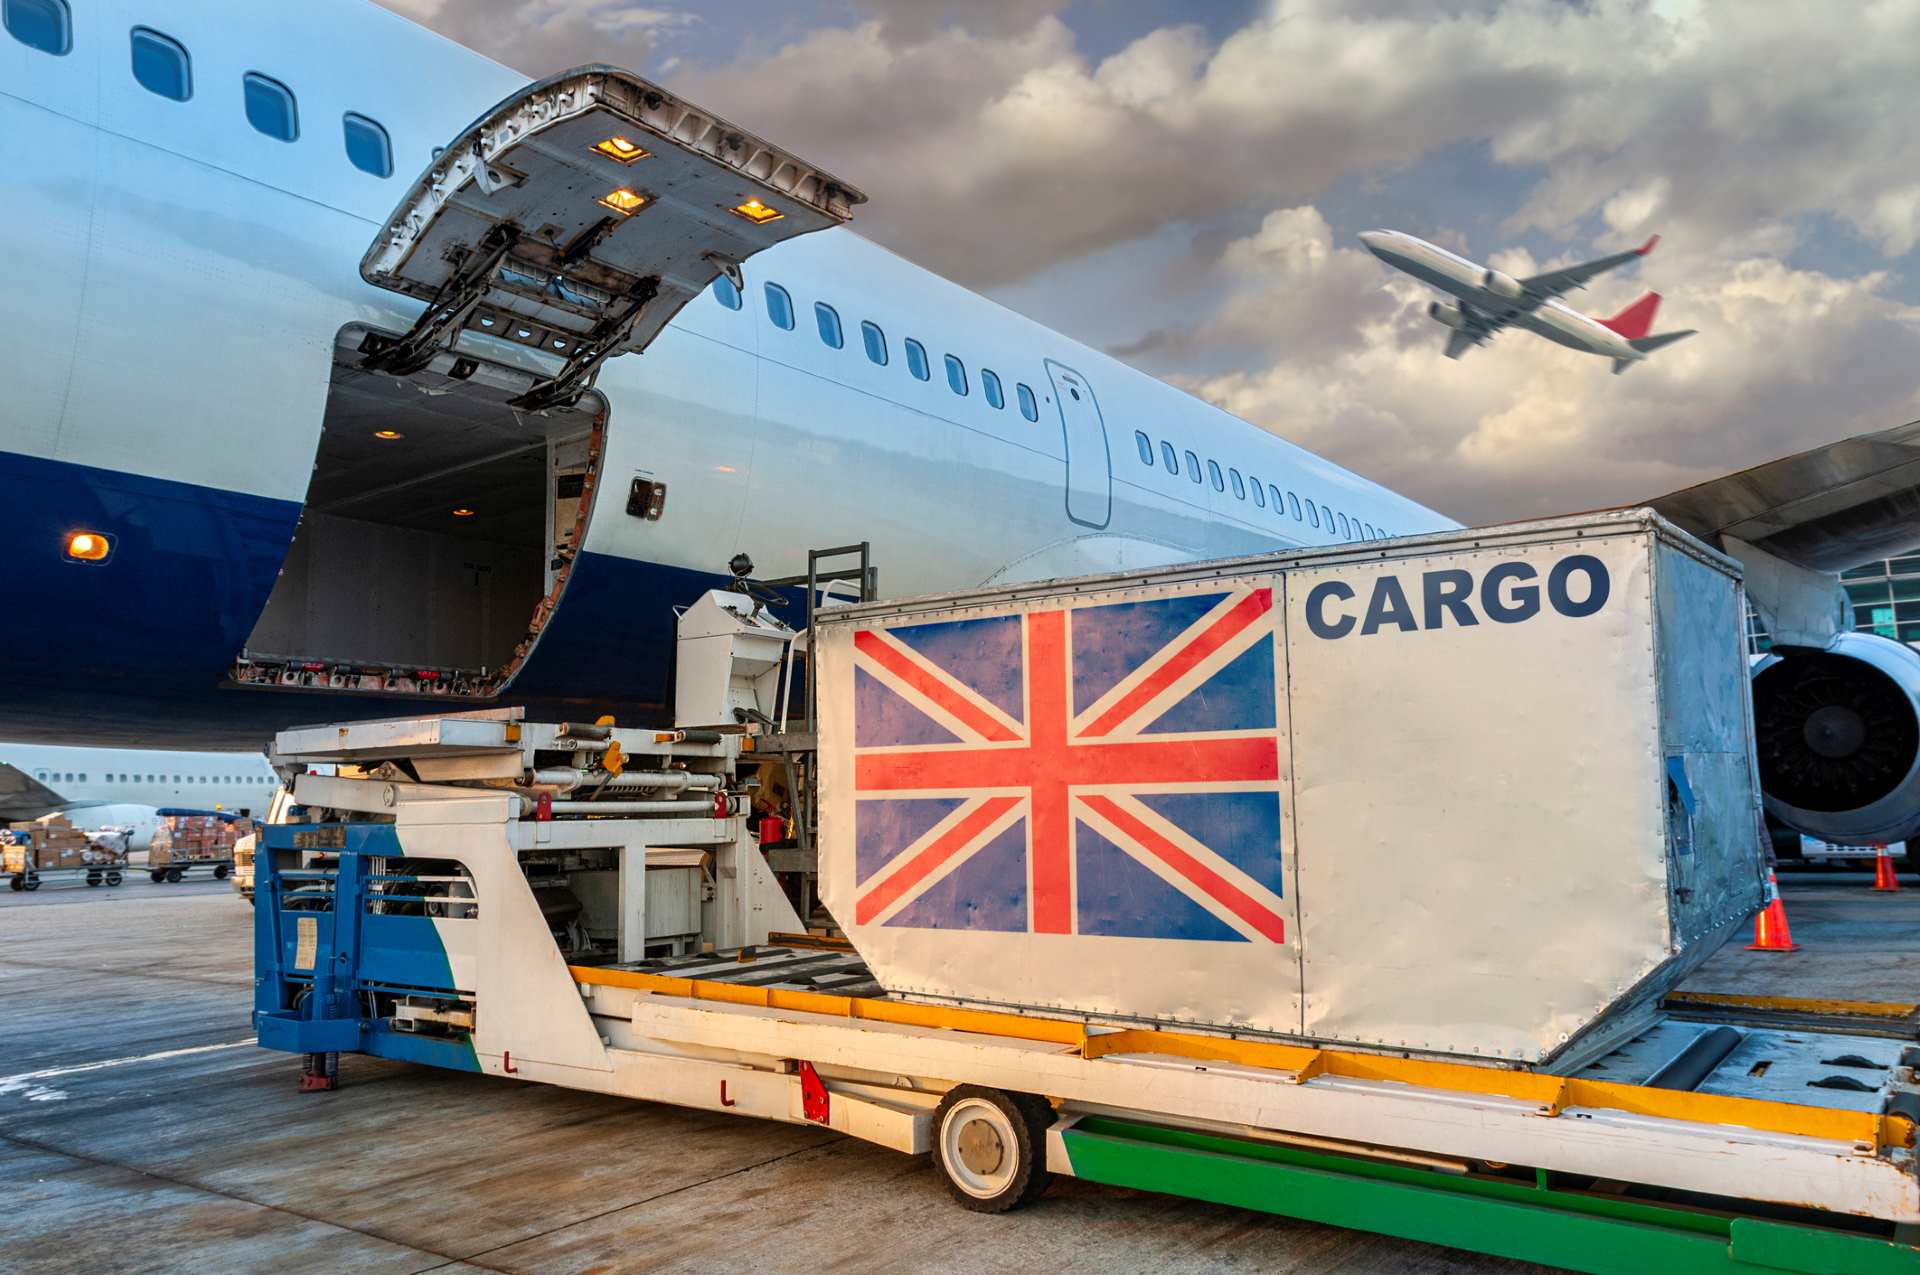 Cargo being loaded onto a freight plane